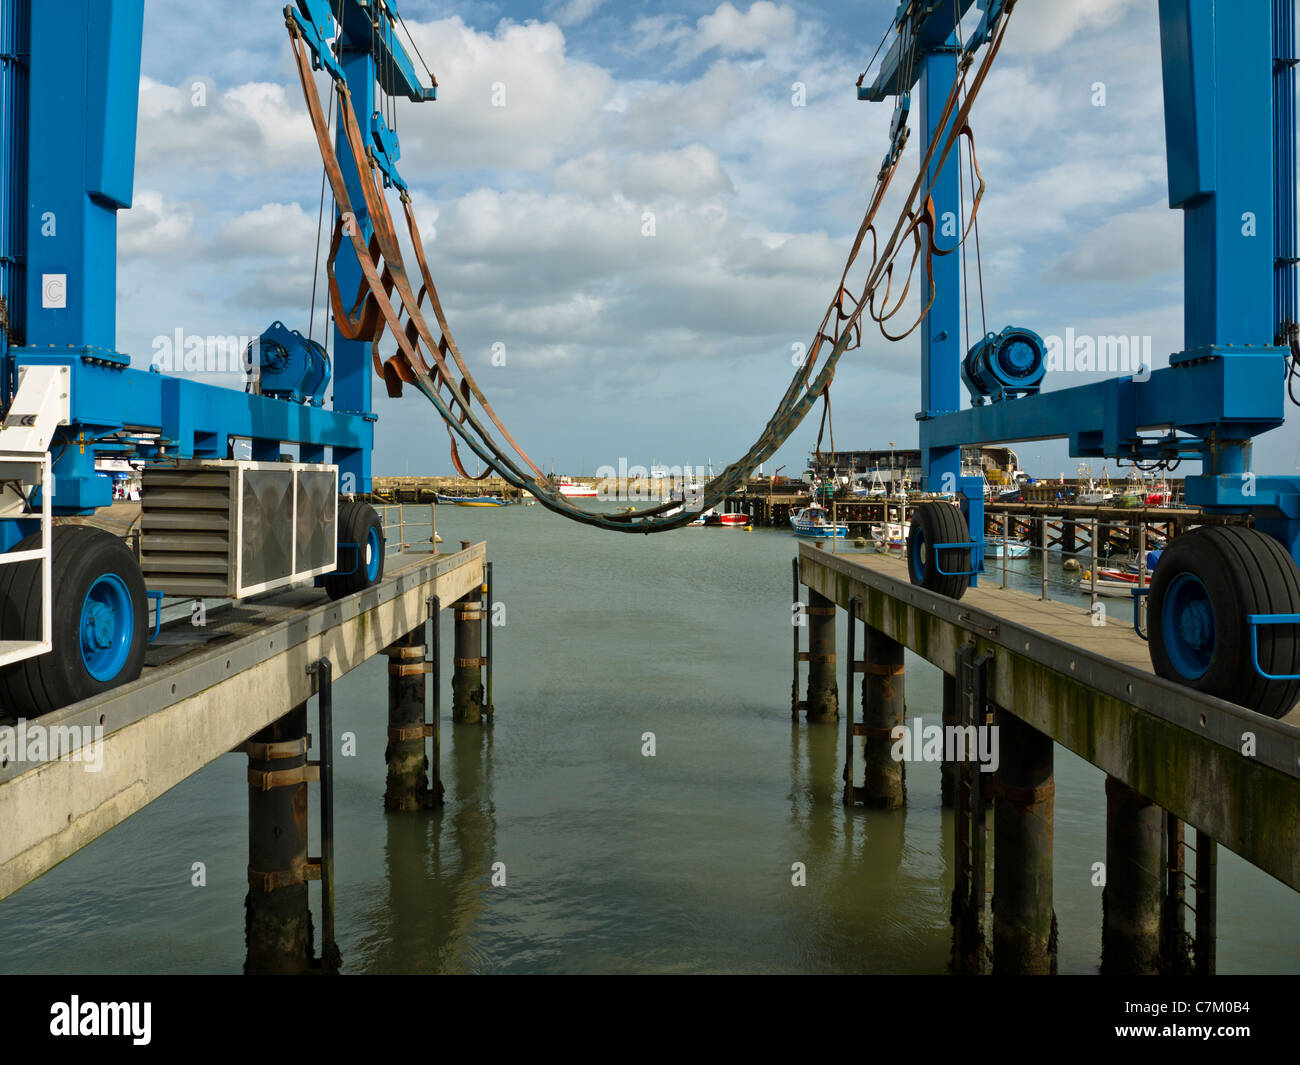 Quay Quayside Boat Repair High Resolution Stock Photography and Images -  Alamy